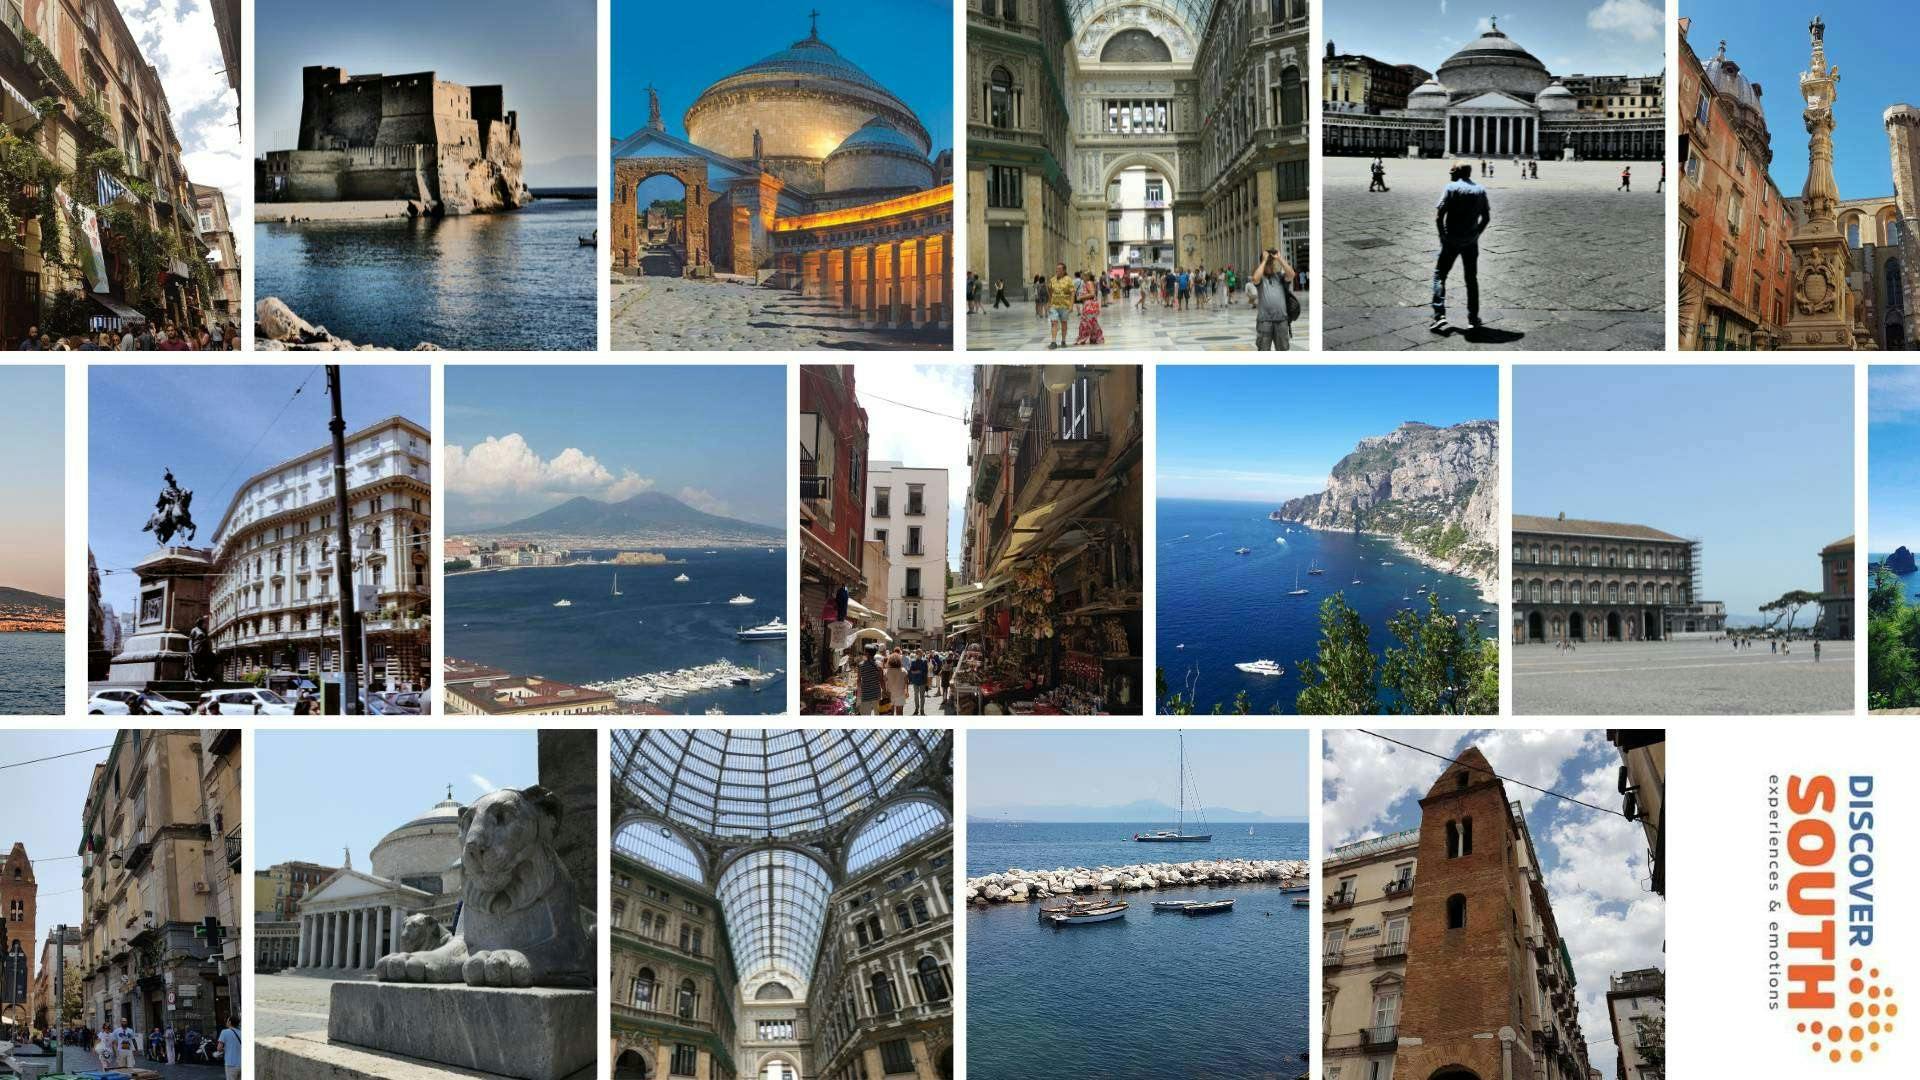 Between Past and Present: Experience Naples through Neapolitan Eyes